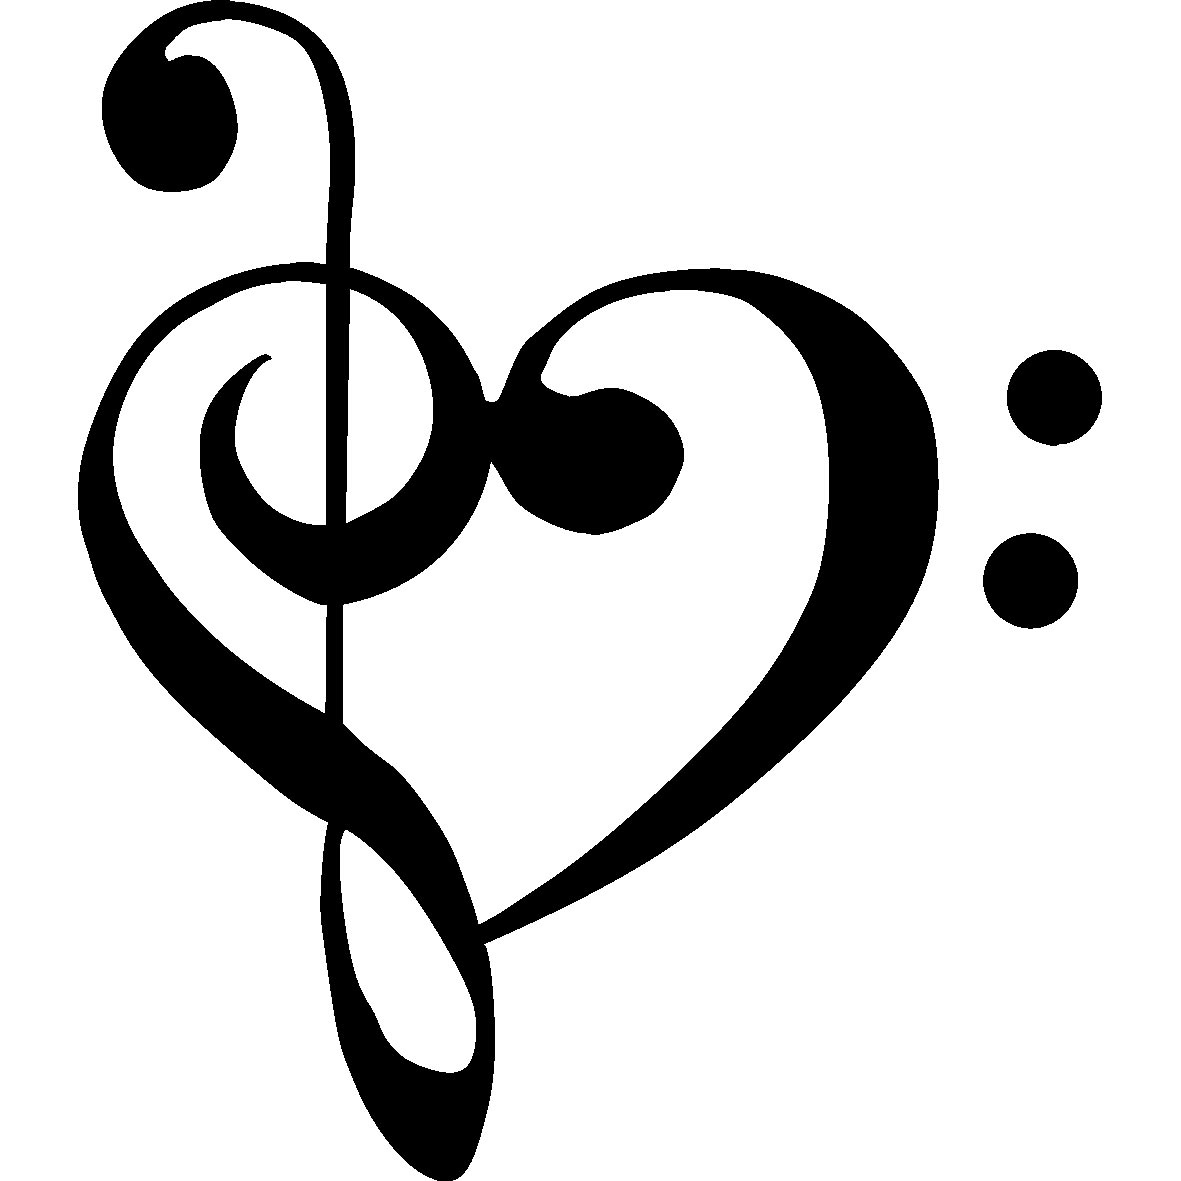 Bass Clef Treble Clef Heart | Free Images at Clker.com - vector ...